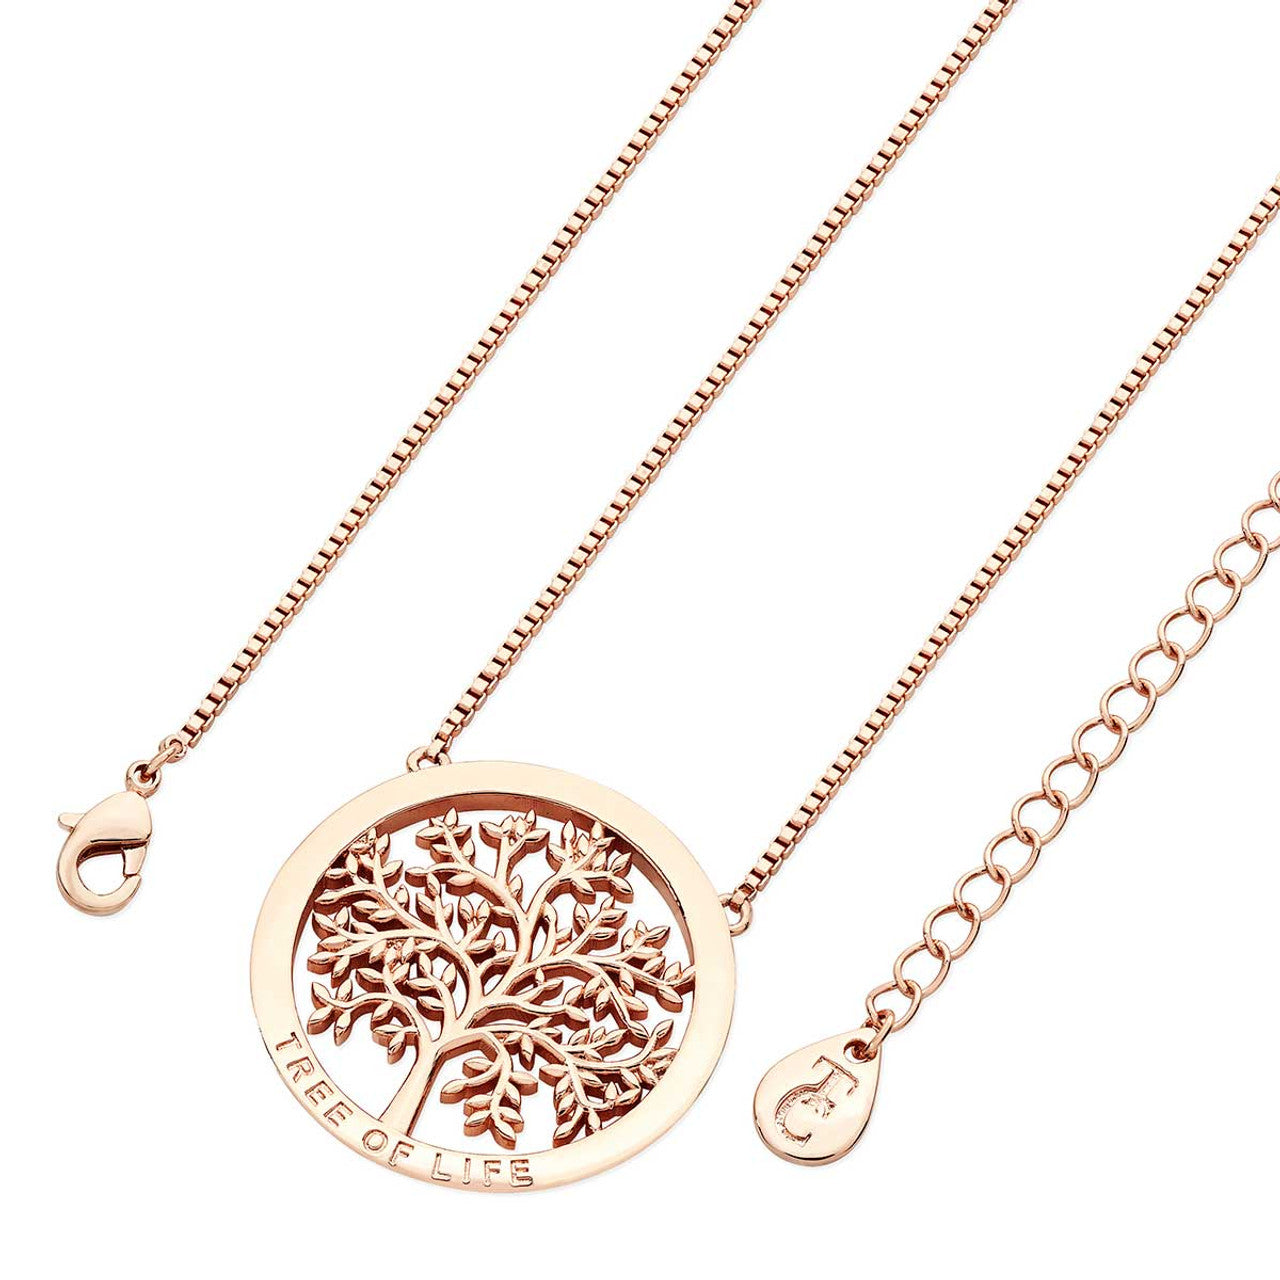 Tipperary Crystal Rose Gold Polished Round Circle With Tree of Life  This exquisite piece consists of a polished rose gold circle surrounding an ornate polished rose gold tree of life, it suspends centred from a shimmering rose gold cable chain and secures safely with a lobster claw clasp.